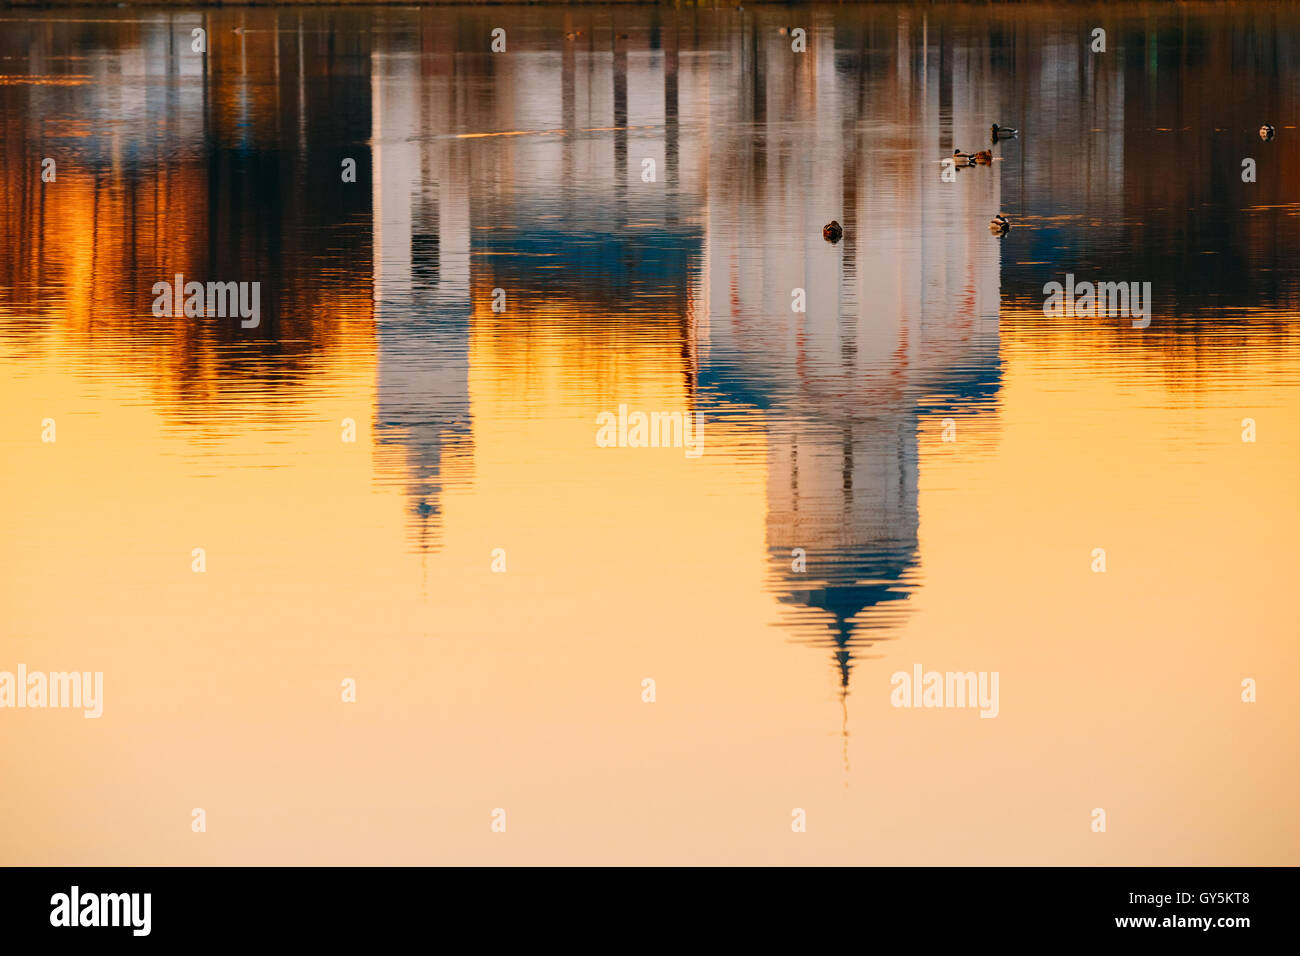 The Reflection Image Of Russian Orthodox Christian Temple Church Chapel On Sunset Sunrise Dawn River Lake Water Surface, Russia. Stock Photo